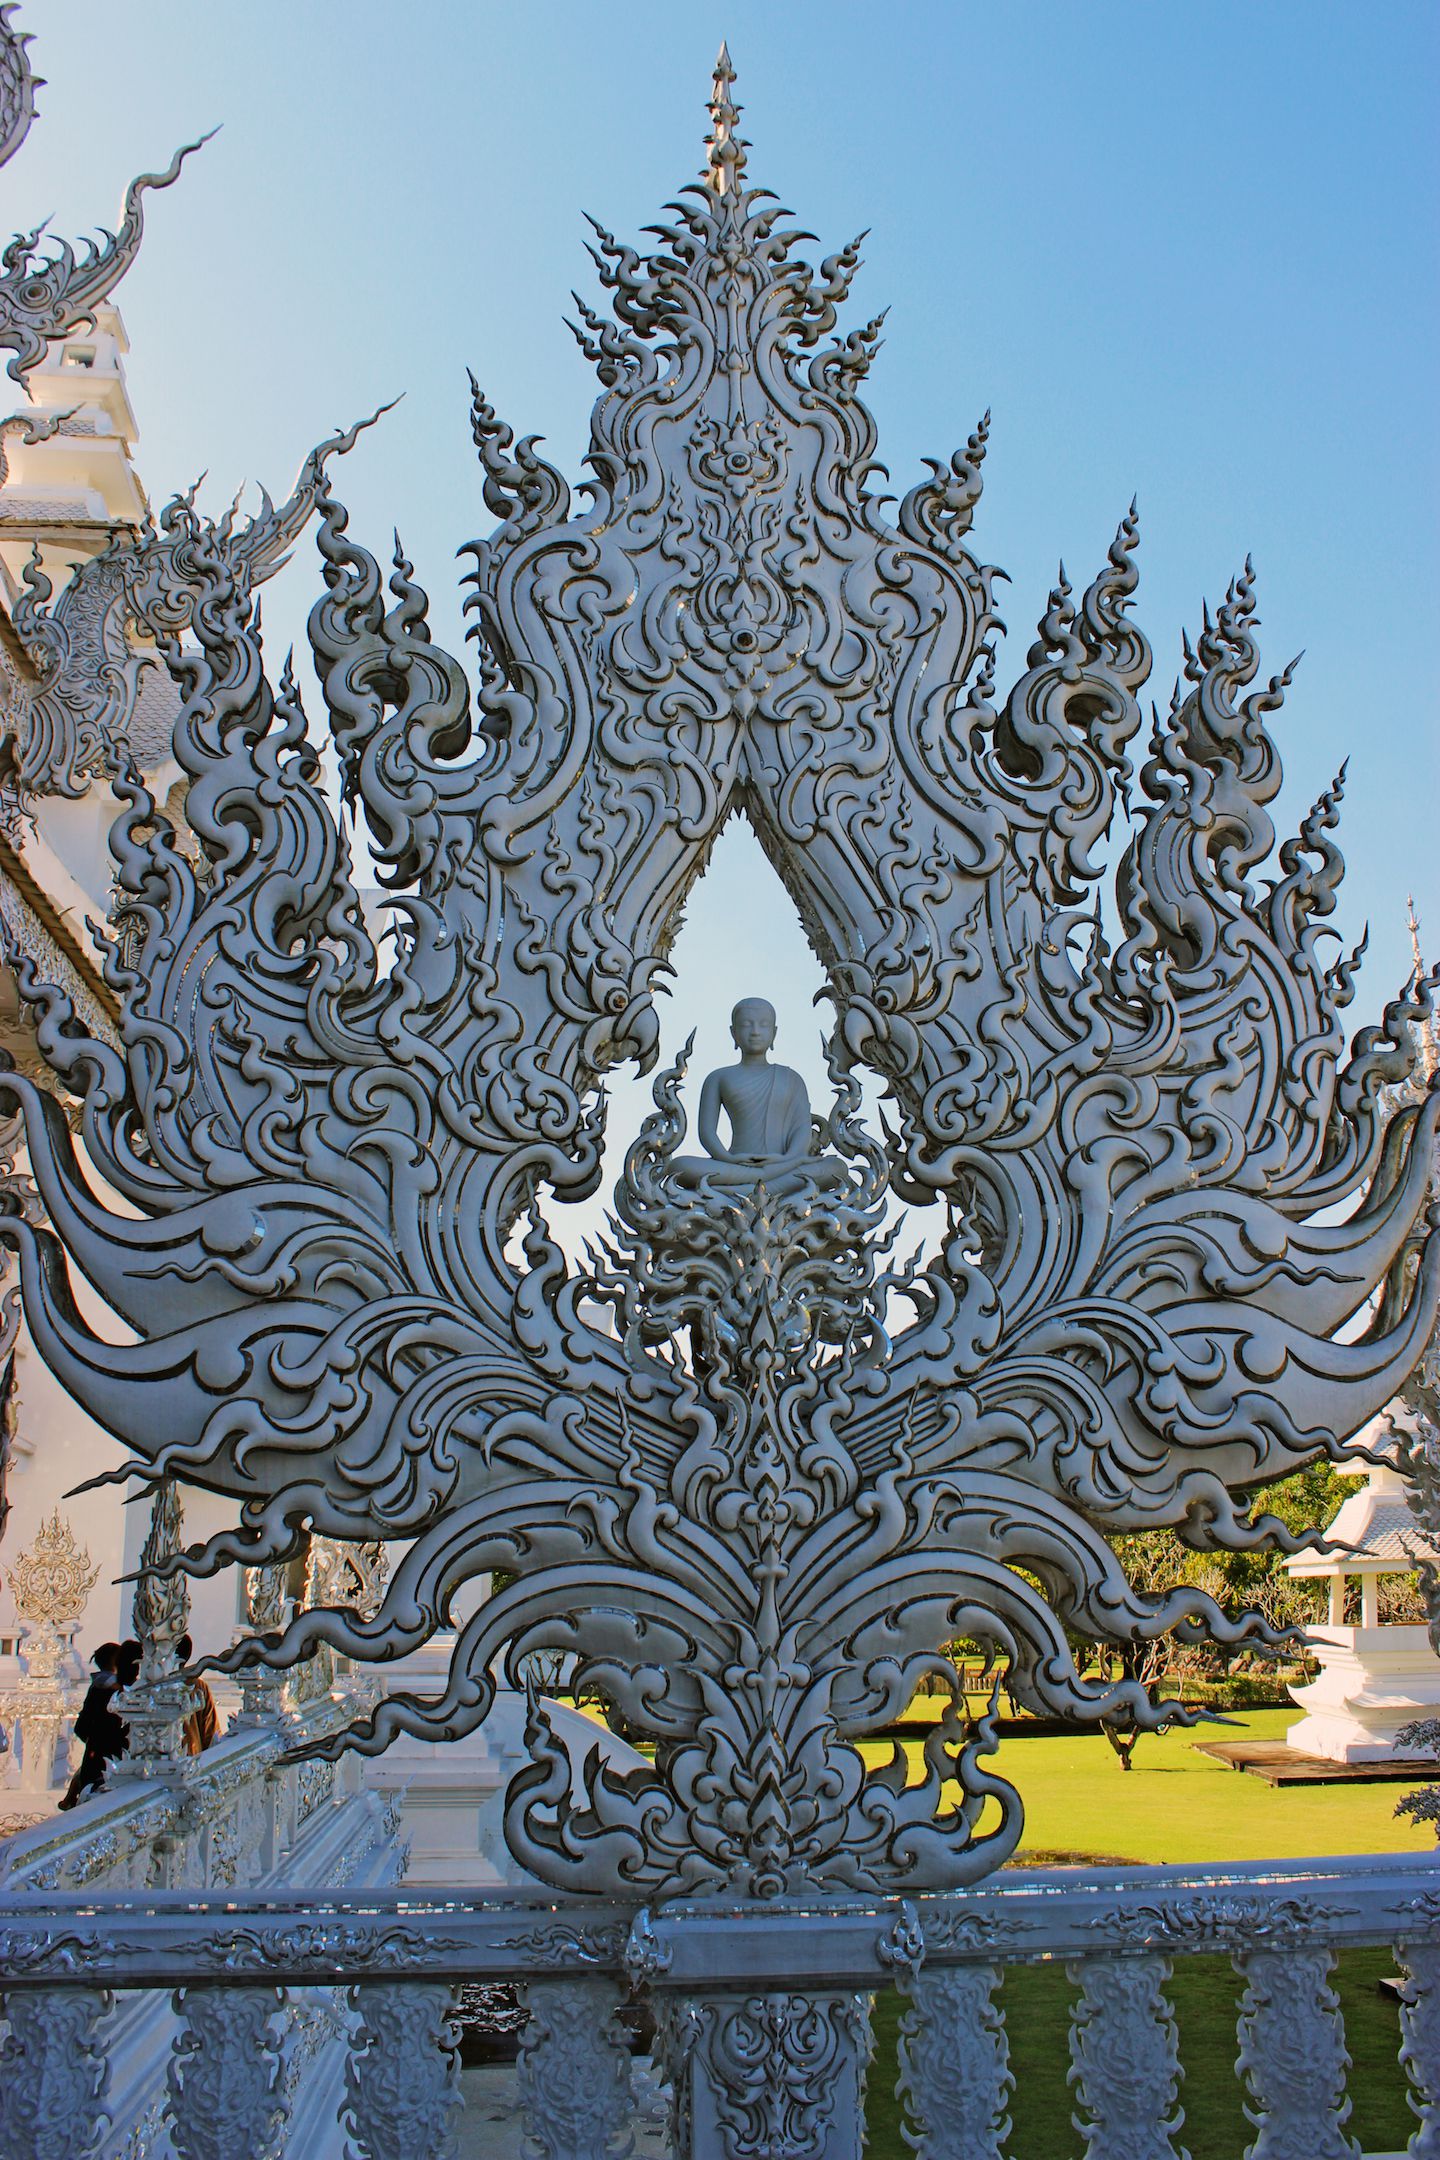 Buddha statue at the White Temple in Chiang Rai